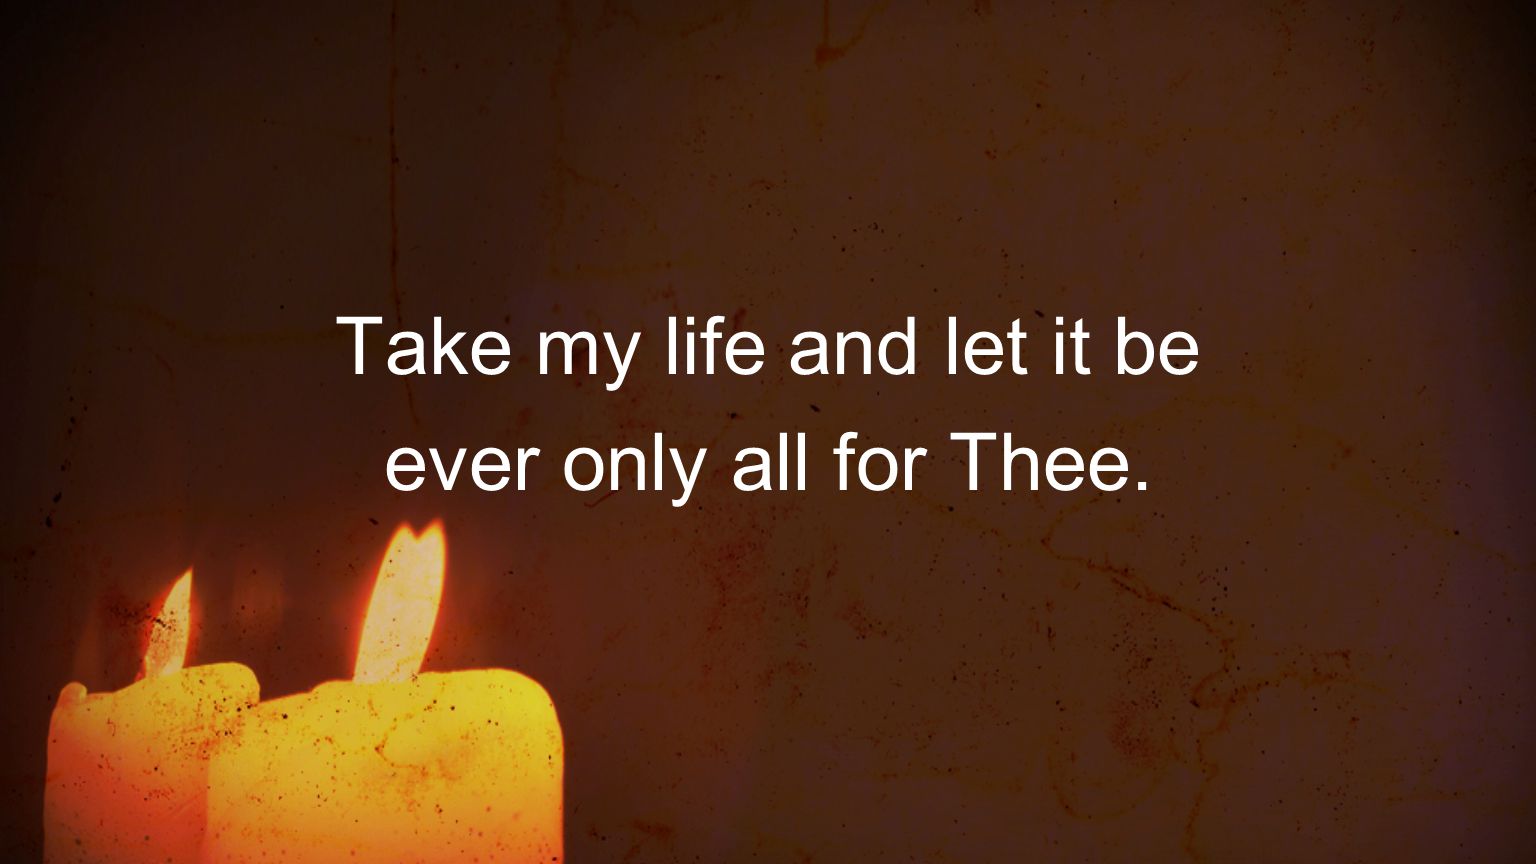 Take my life and let it be ever only all for Thee.